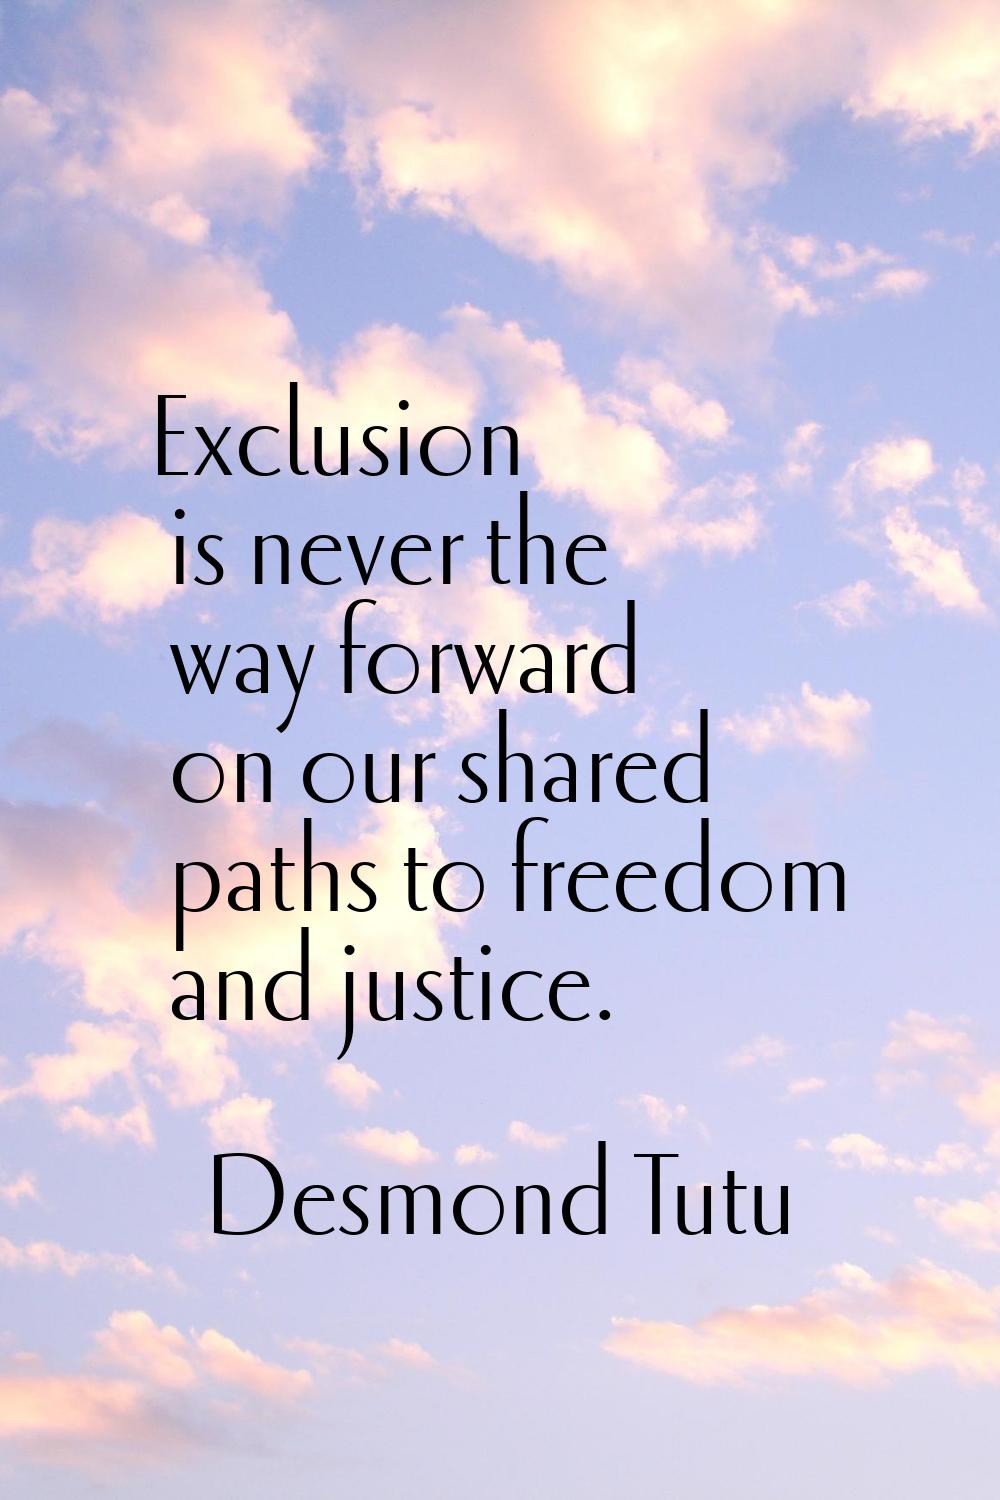 Exclusion is never the way forward on our shared paths to freedom and justice.